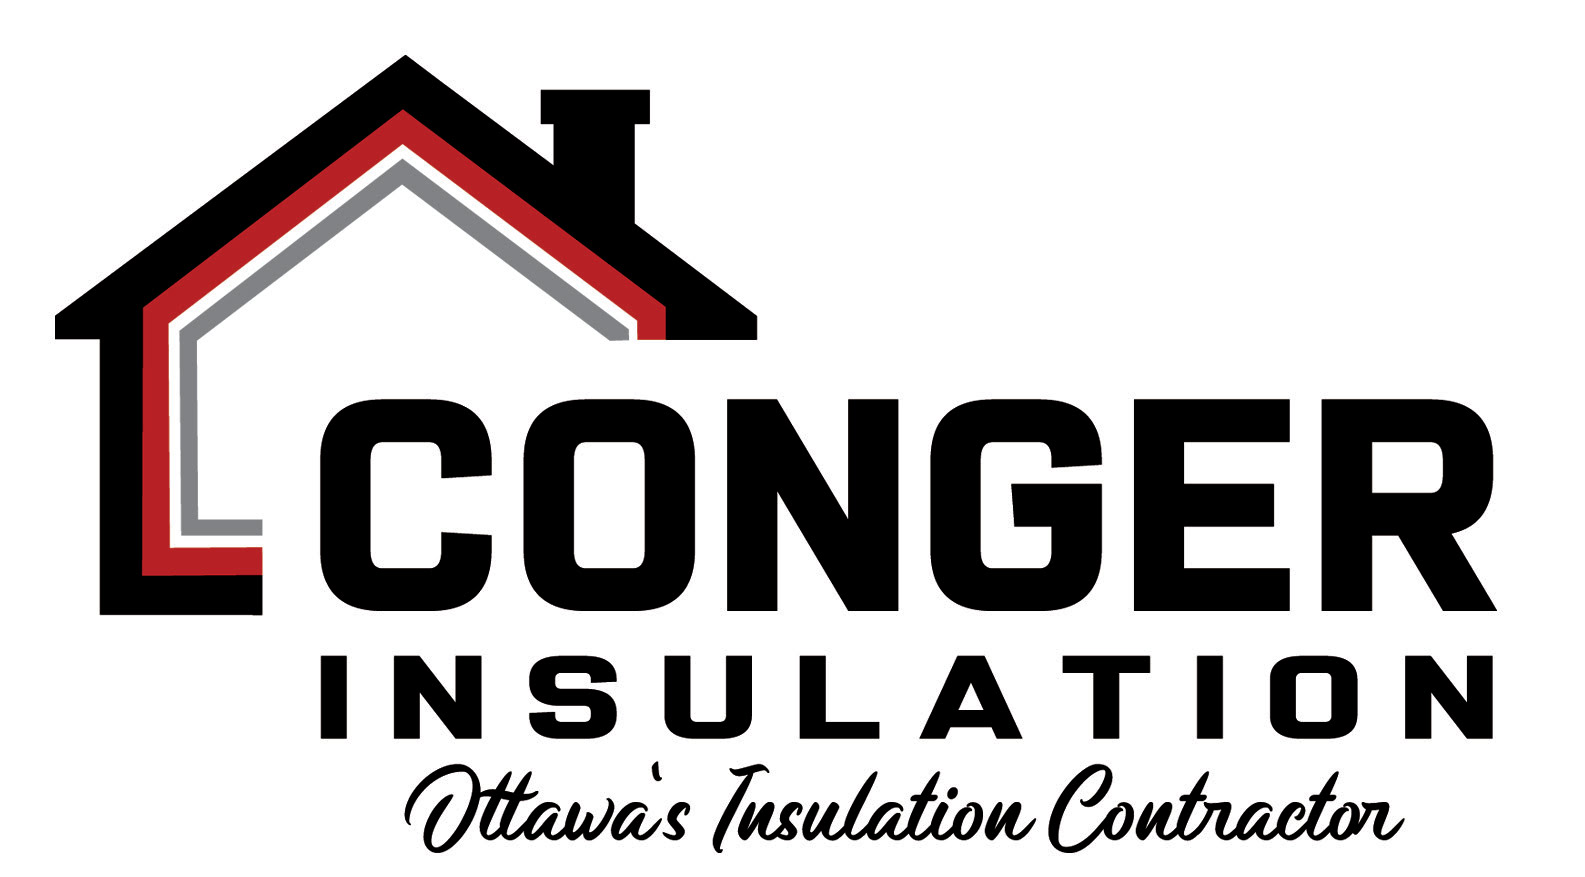 Ottawa Insulation Contractor - Conger Insulation Limited